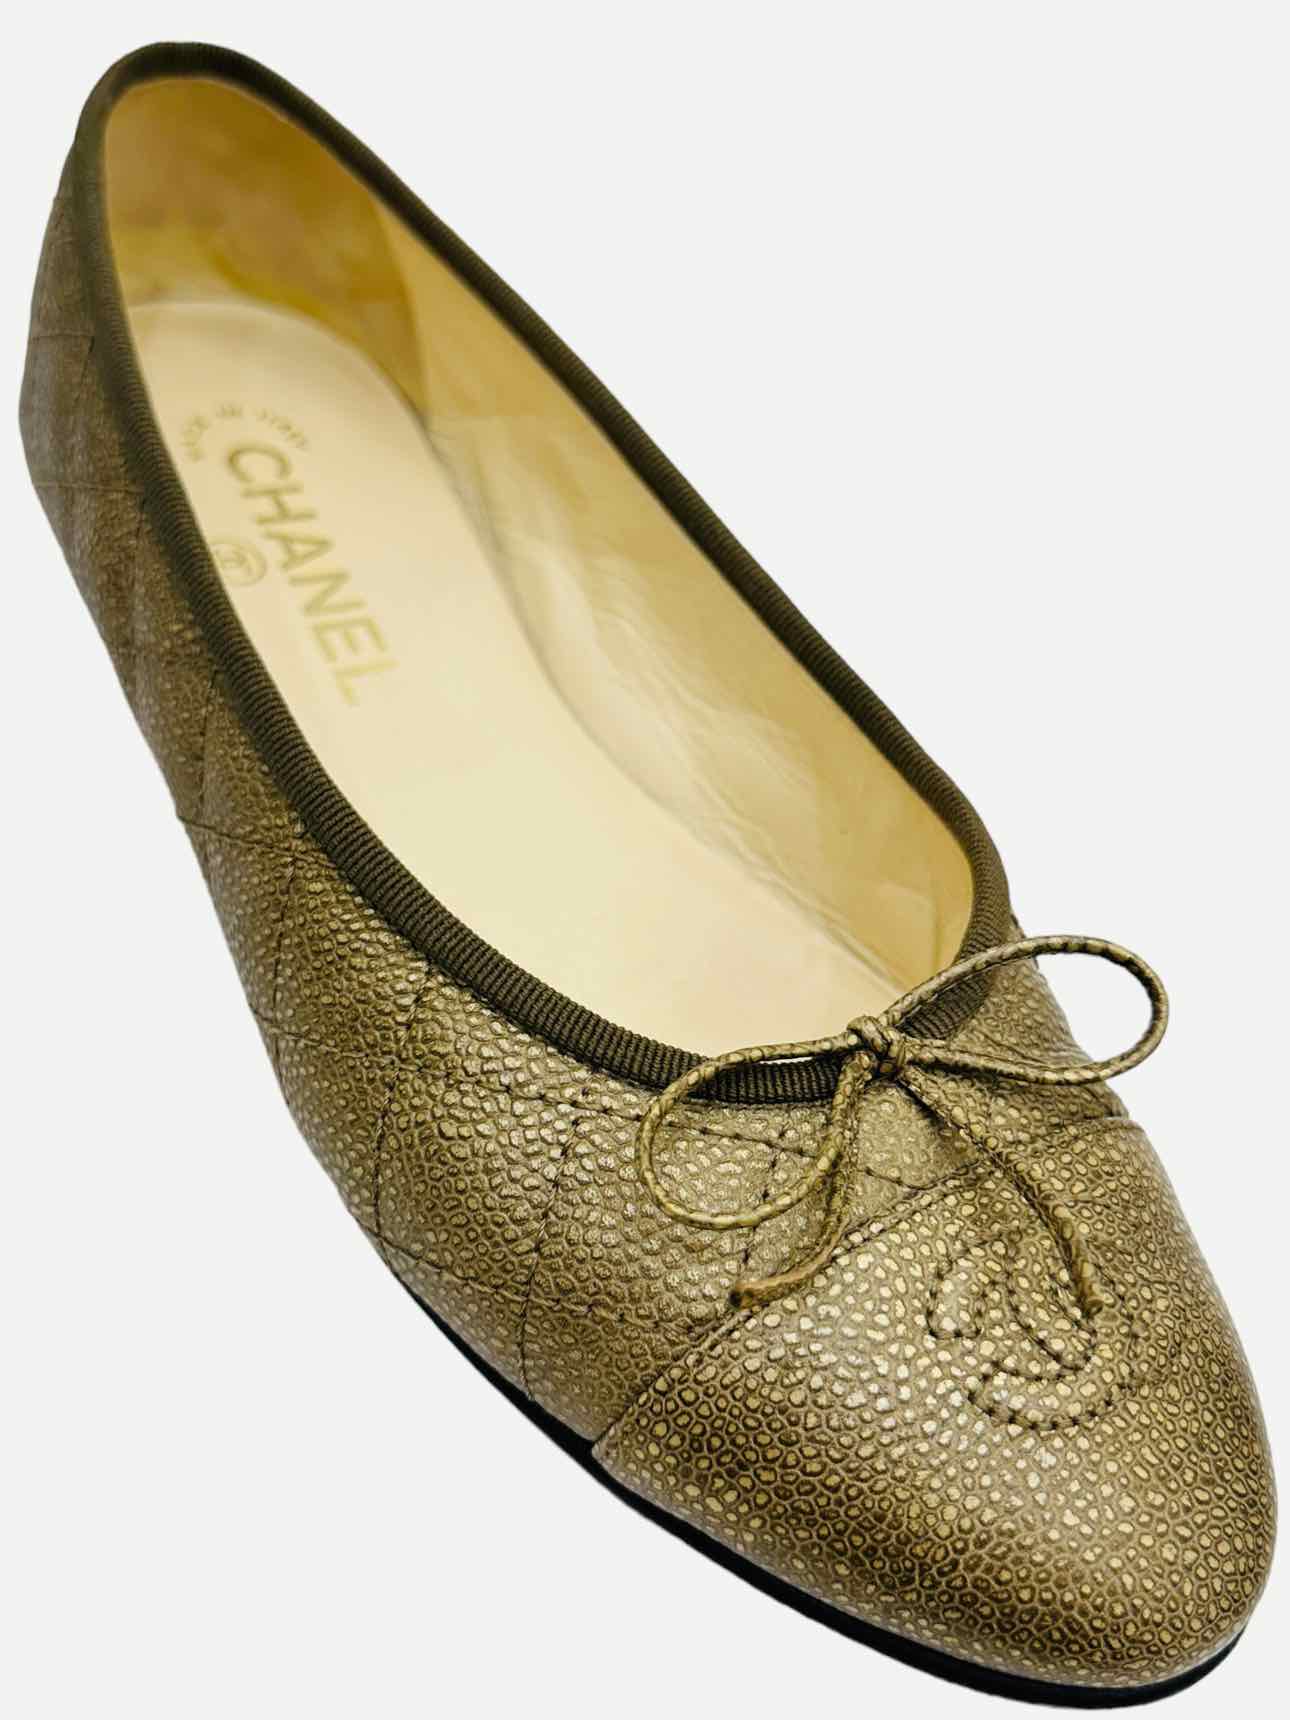 CHANEL CC Gold Cracked Flats